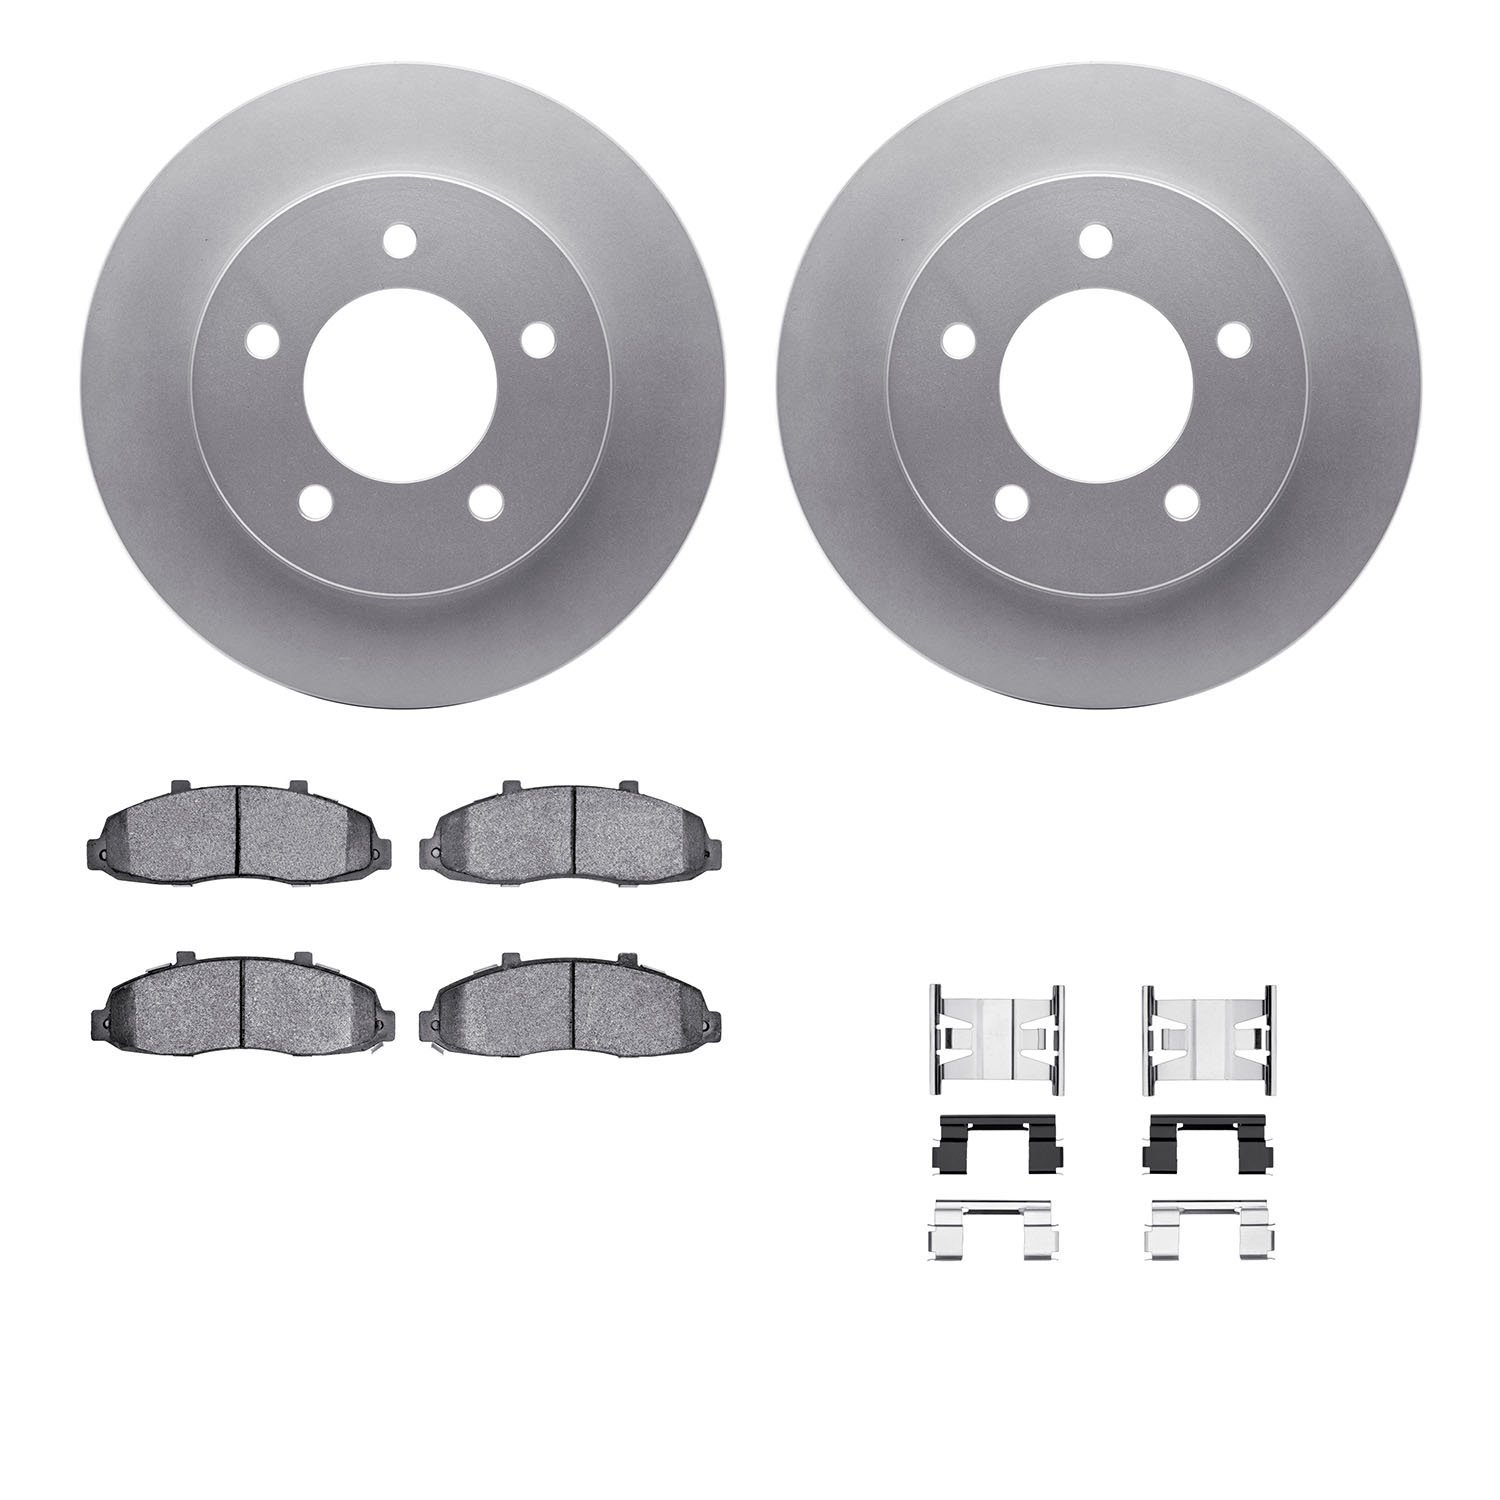 4412-54018 Geospec Brake Rotors with Ultimate-Duty Brake Pads & Hardware, 1997-2004 Ford/Lincoln/Mercury/Mazda, Position: Front